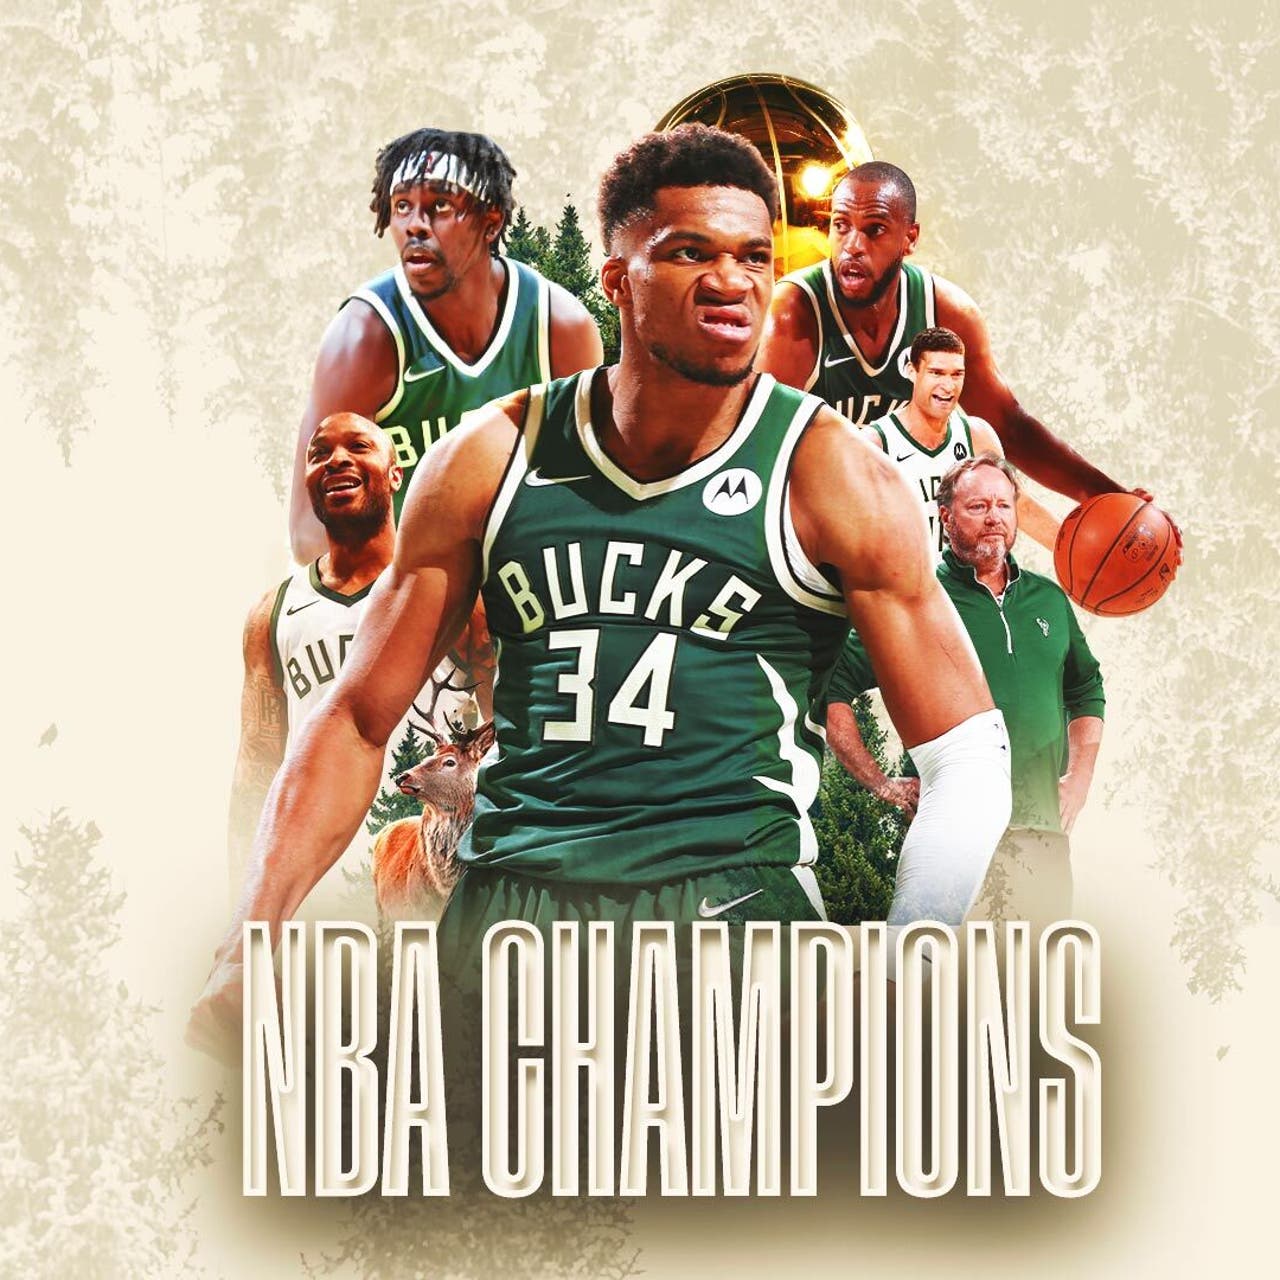 A Letter to My Bucks Family by Oscar Robertson